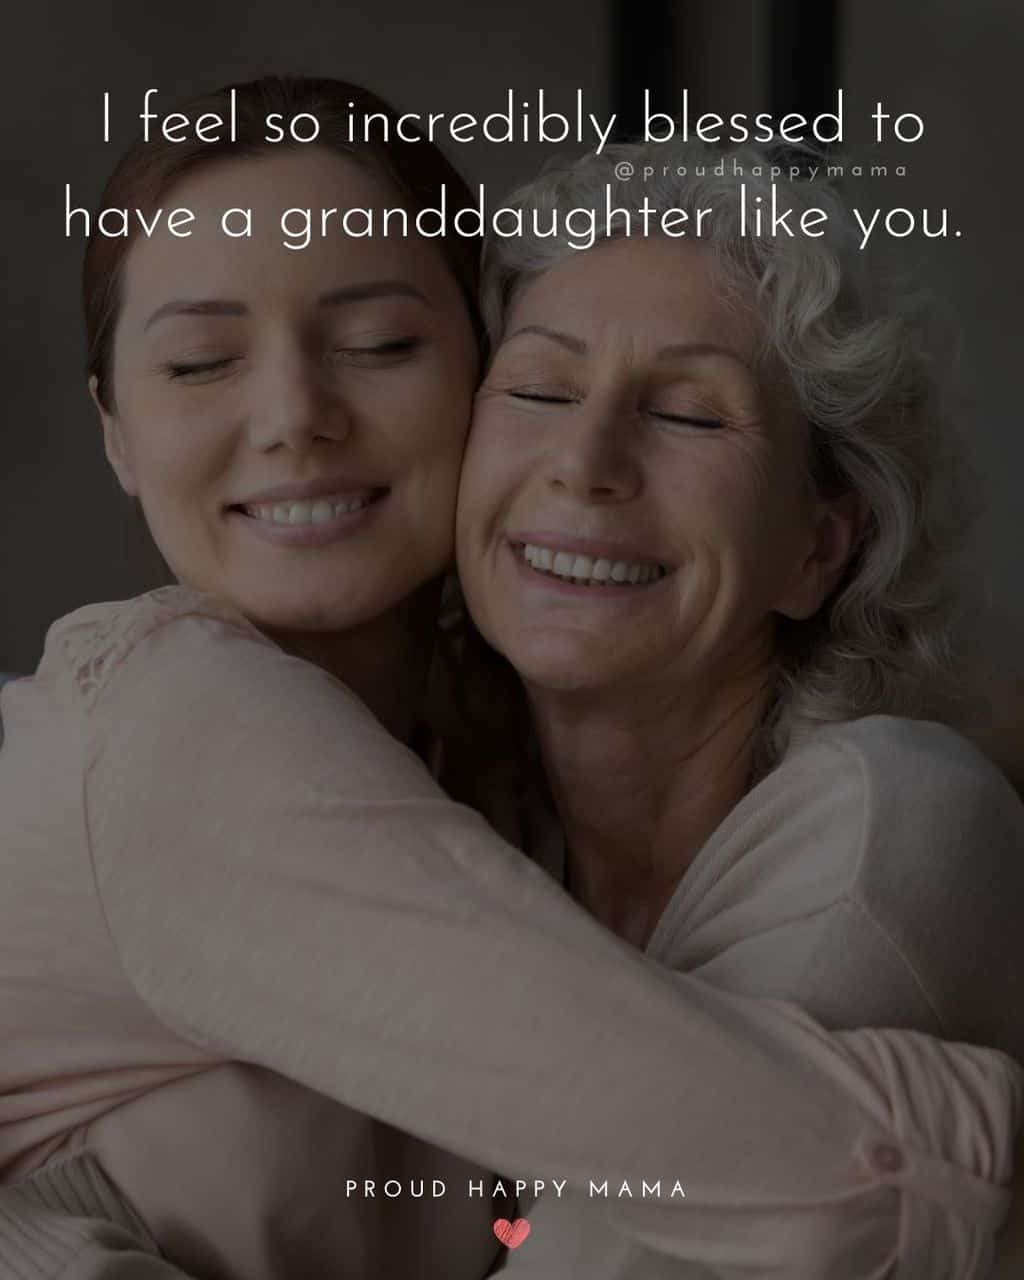 Granddaughter Quotes - I feel so incredibly blessed to have a granddaughter like you.’